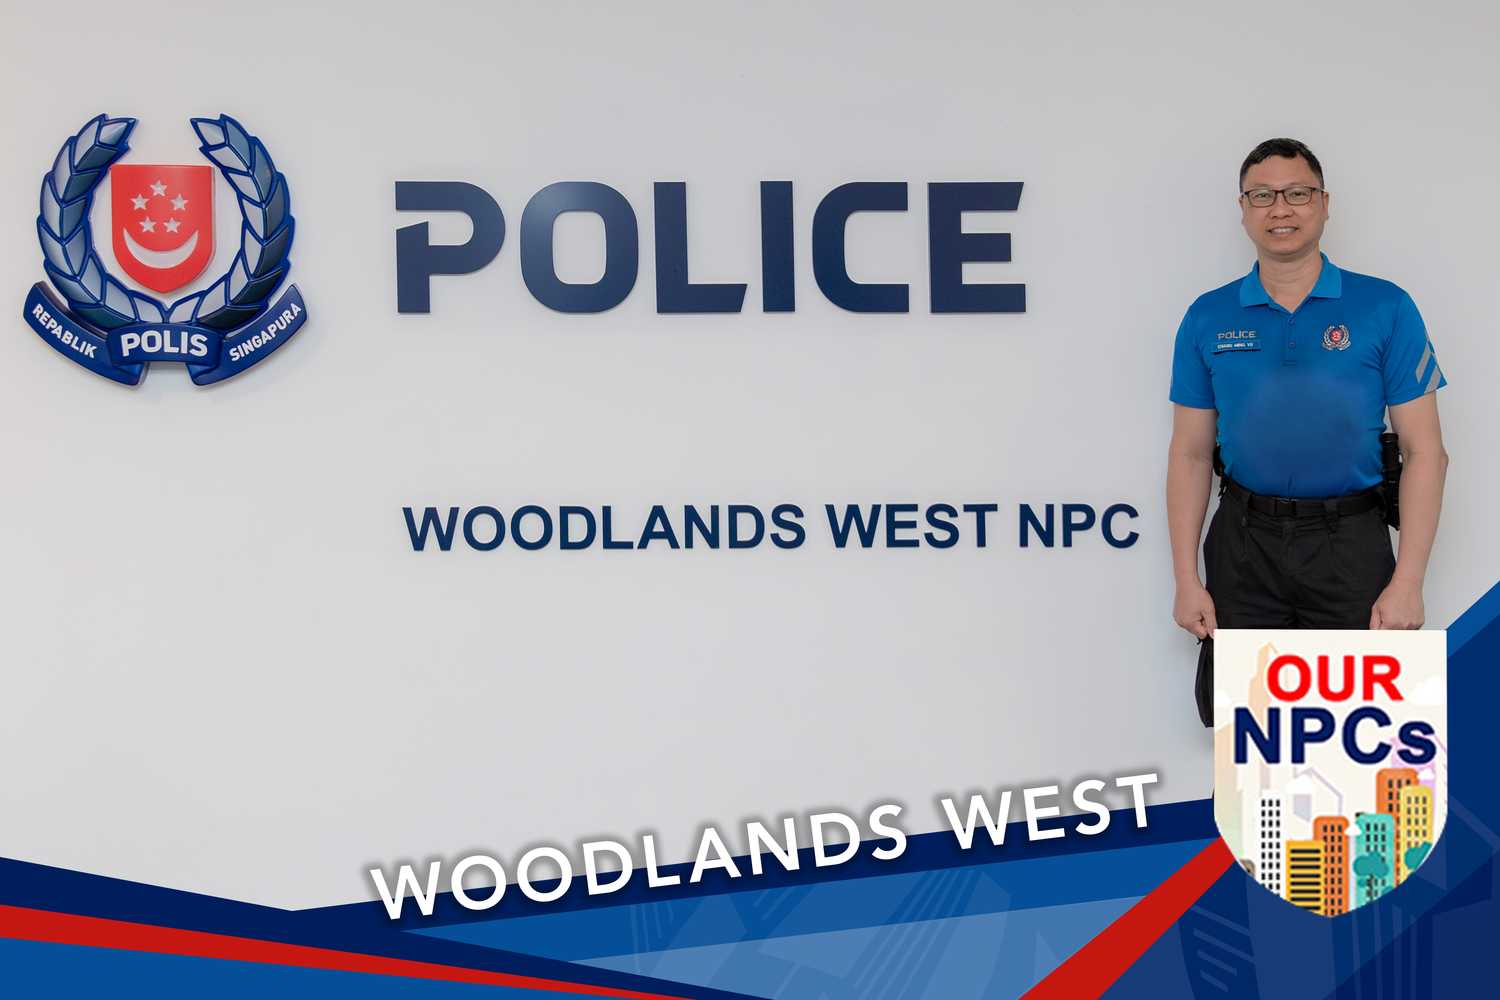 VSCC officer standing infront of the NPC signage wearing a blue polo tee